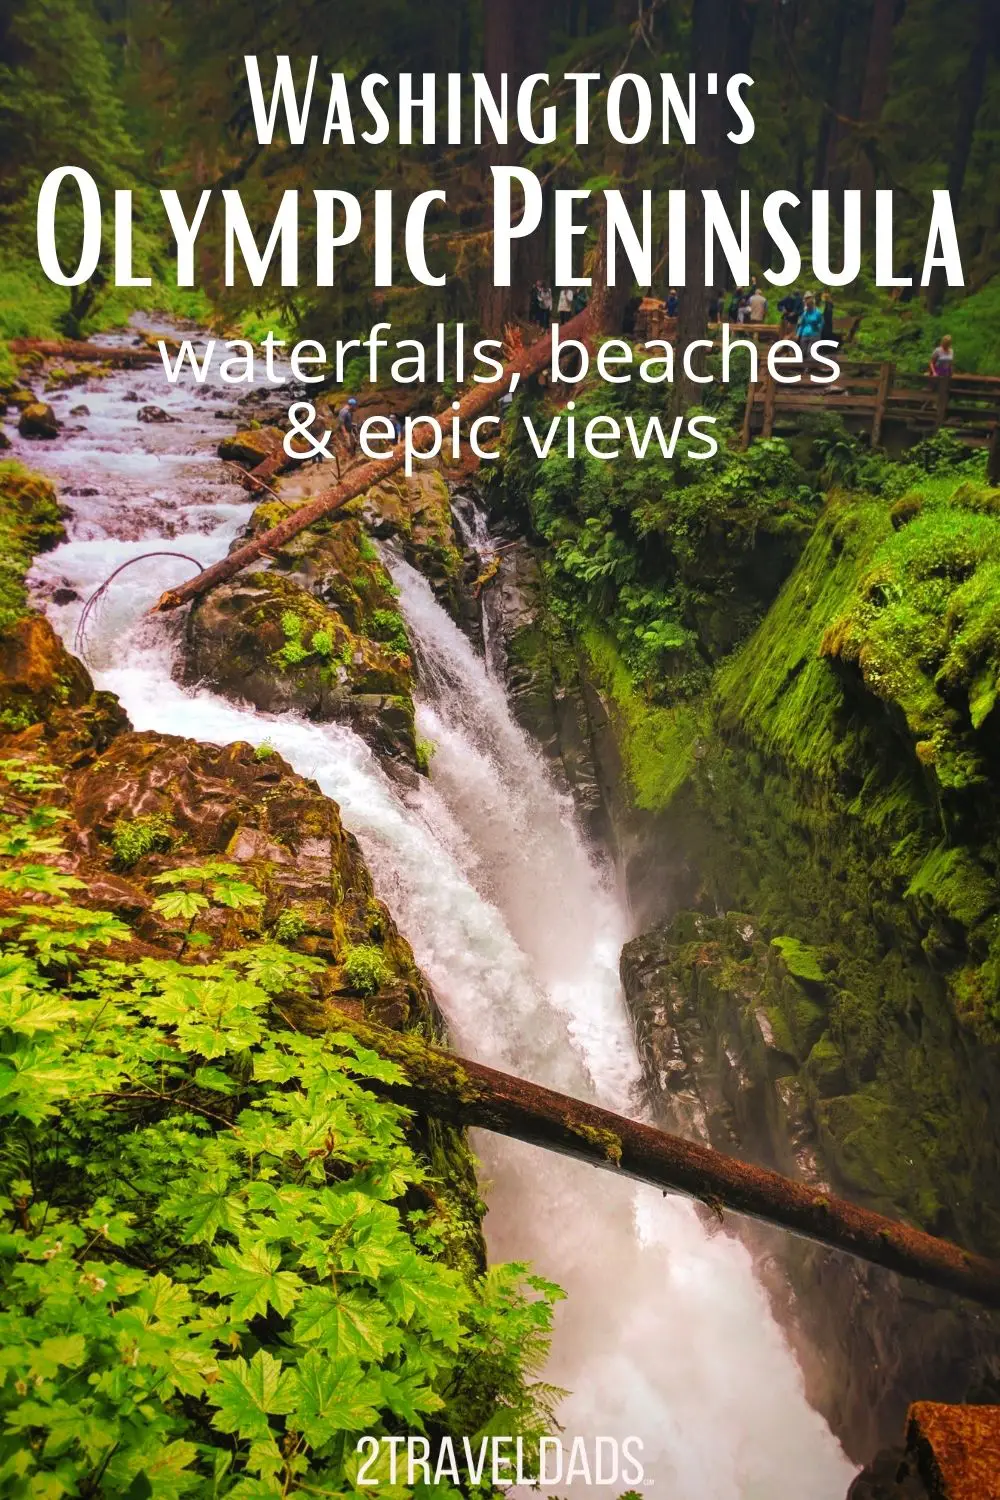 The best things to do on the Olympic Peninsula, including Olympic National Park sites, beaches, lighthouse and more. When to visit the Olympic Peninsula, free activities, and epic views in Washington State.